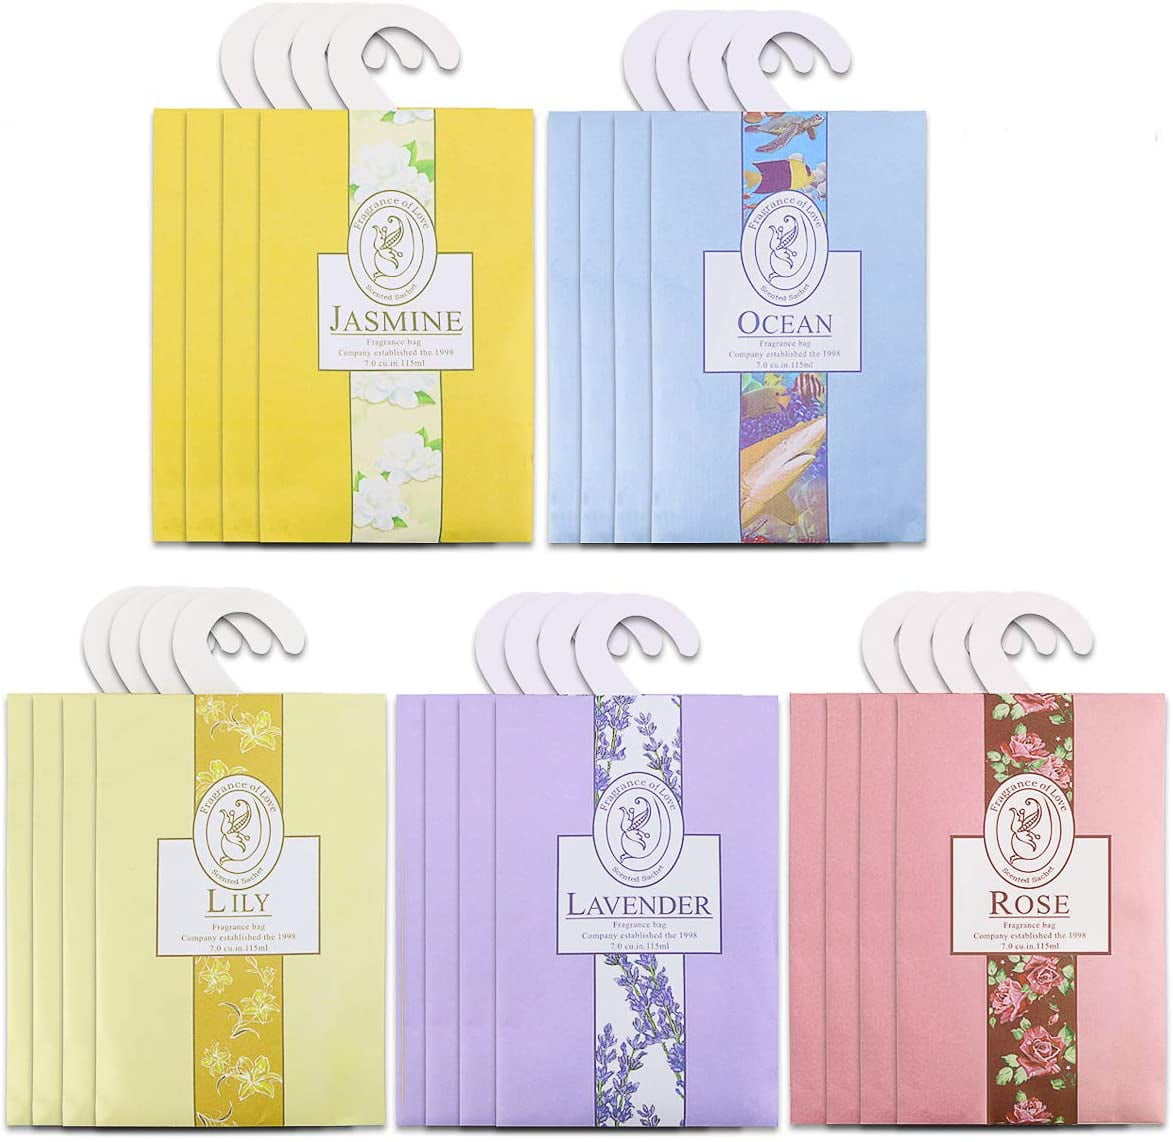 Details about   10x Scented Sachet Envelope Aromatic Lavender Jasmine for Closets 1-2 Months 